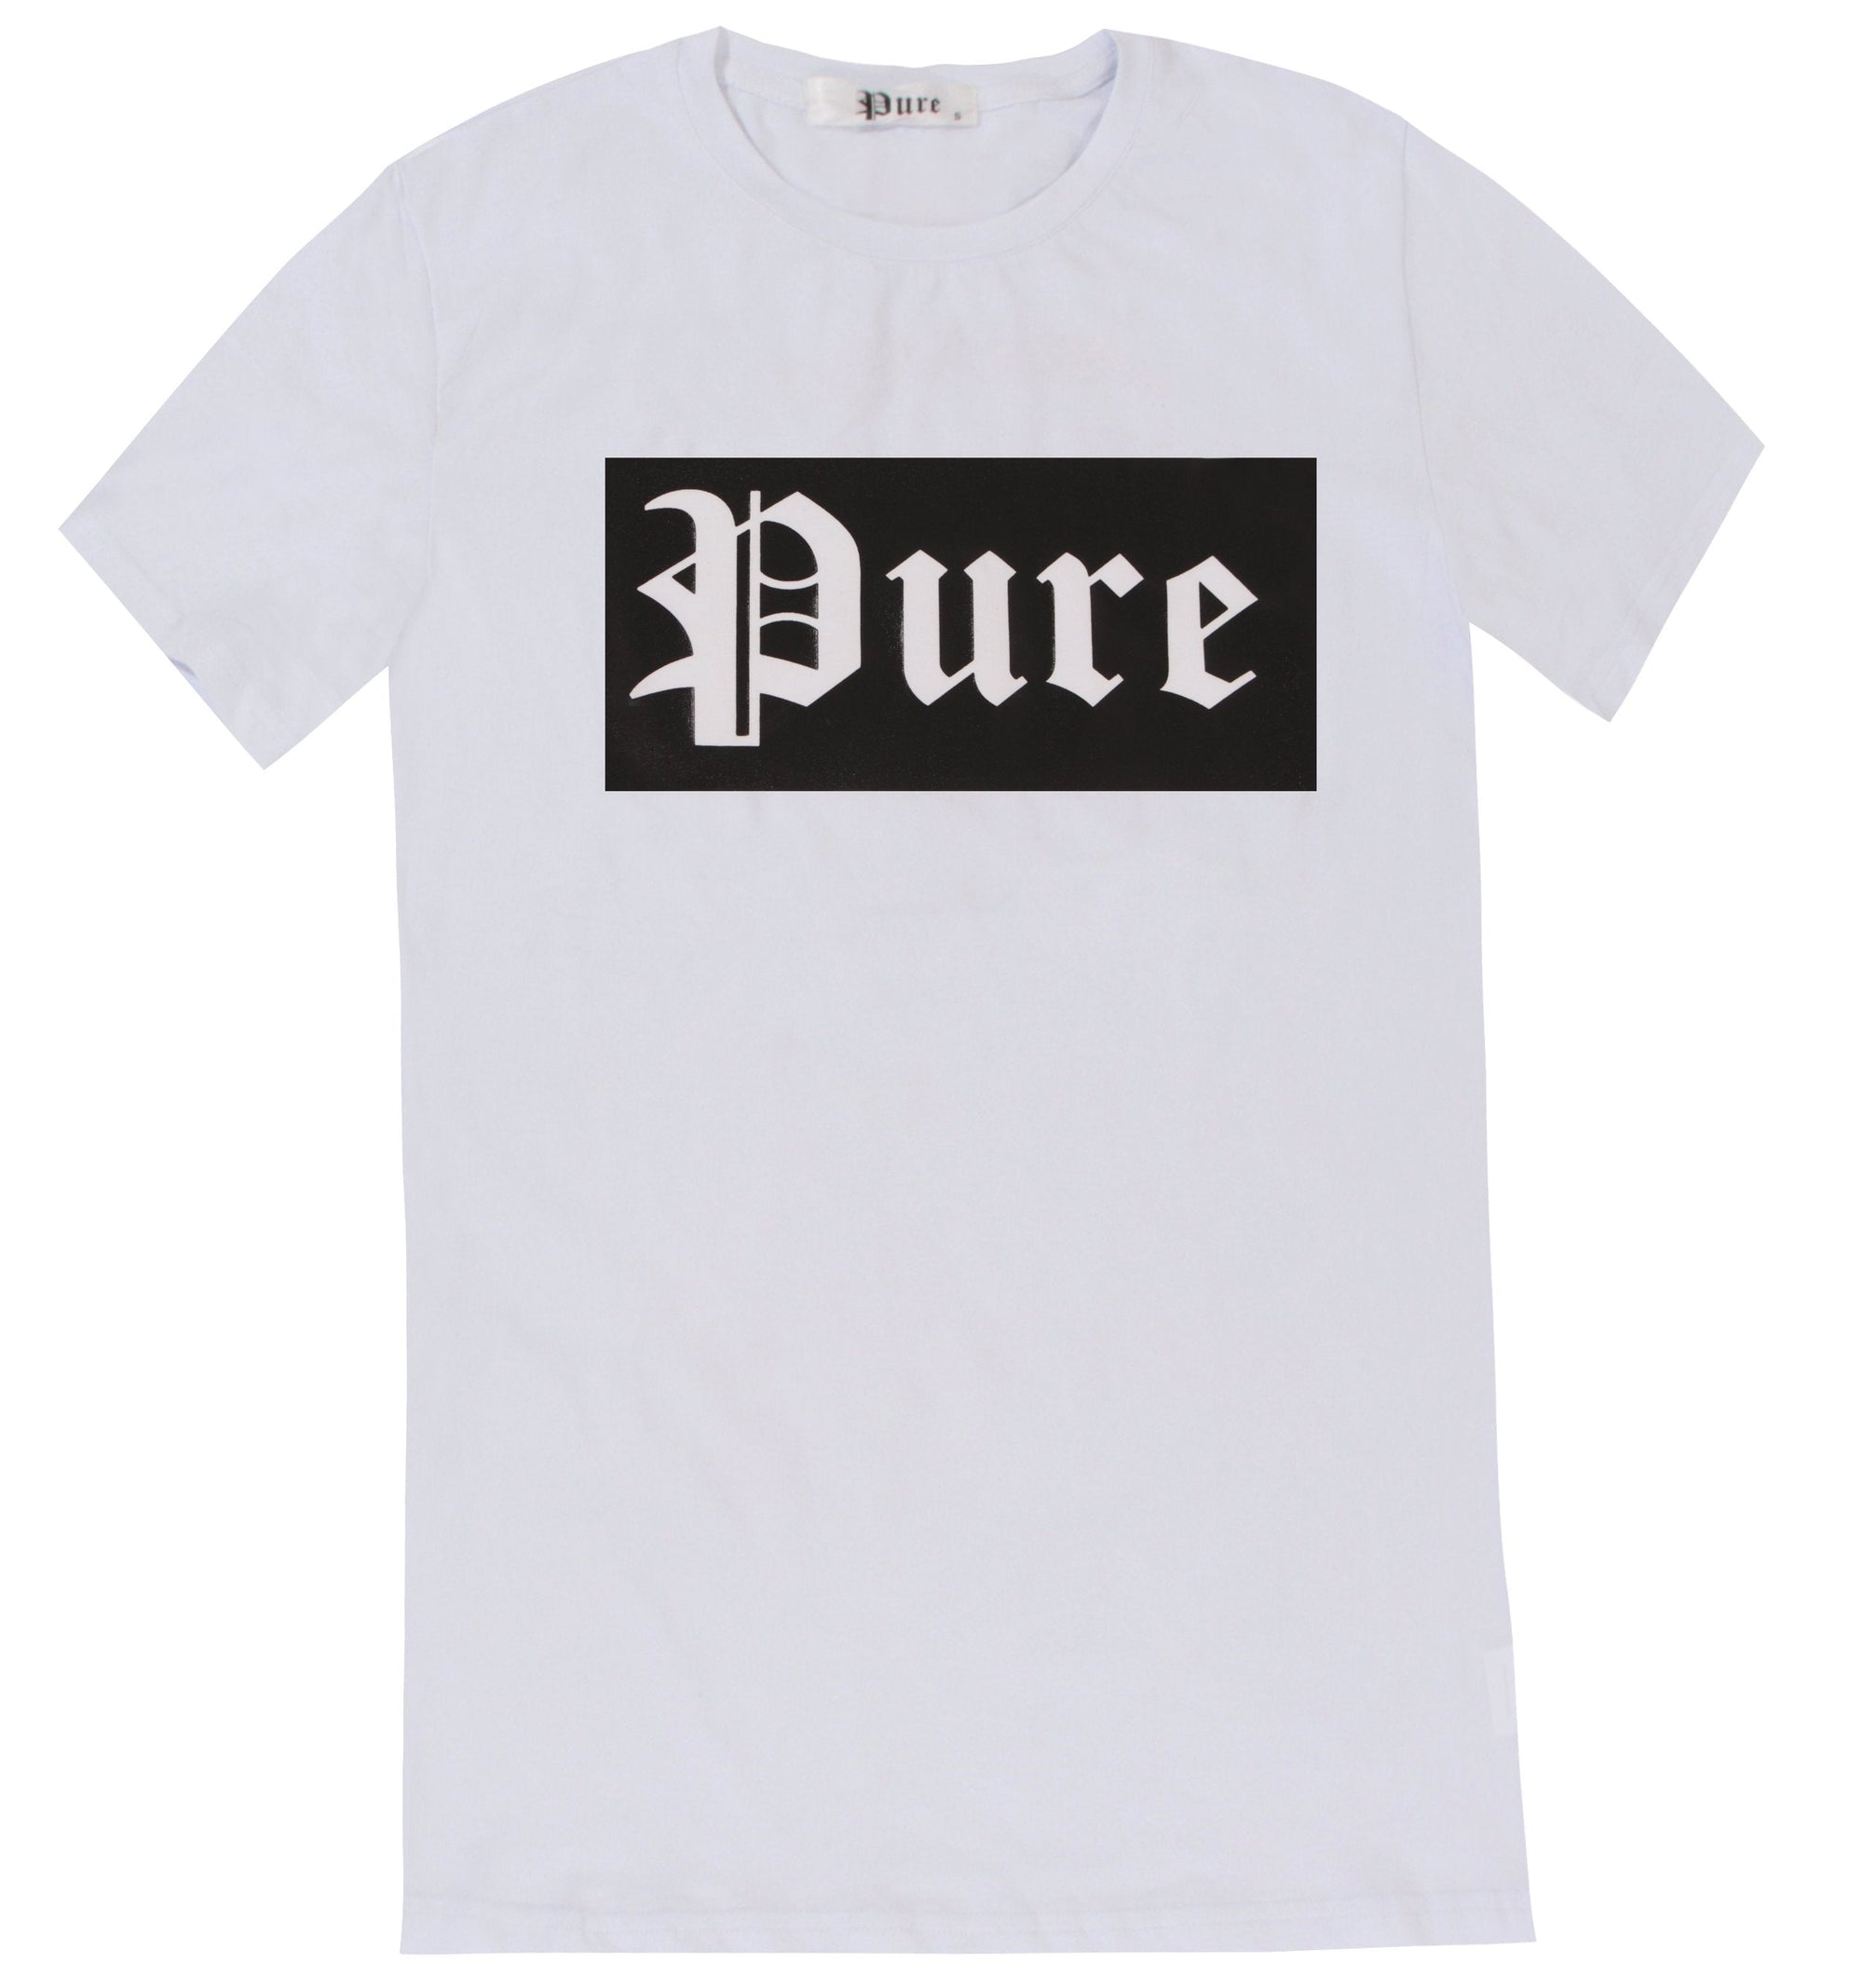 New 2021 Stretch Pure Tee White with Black Block Logo